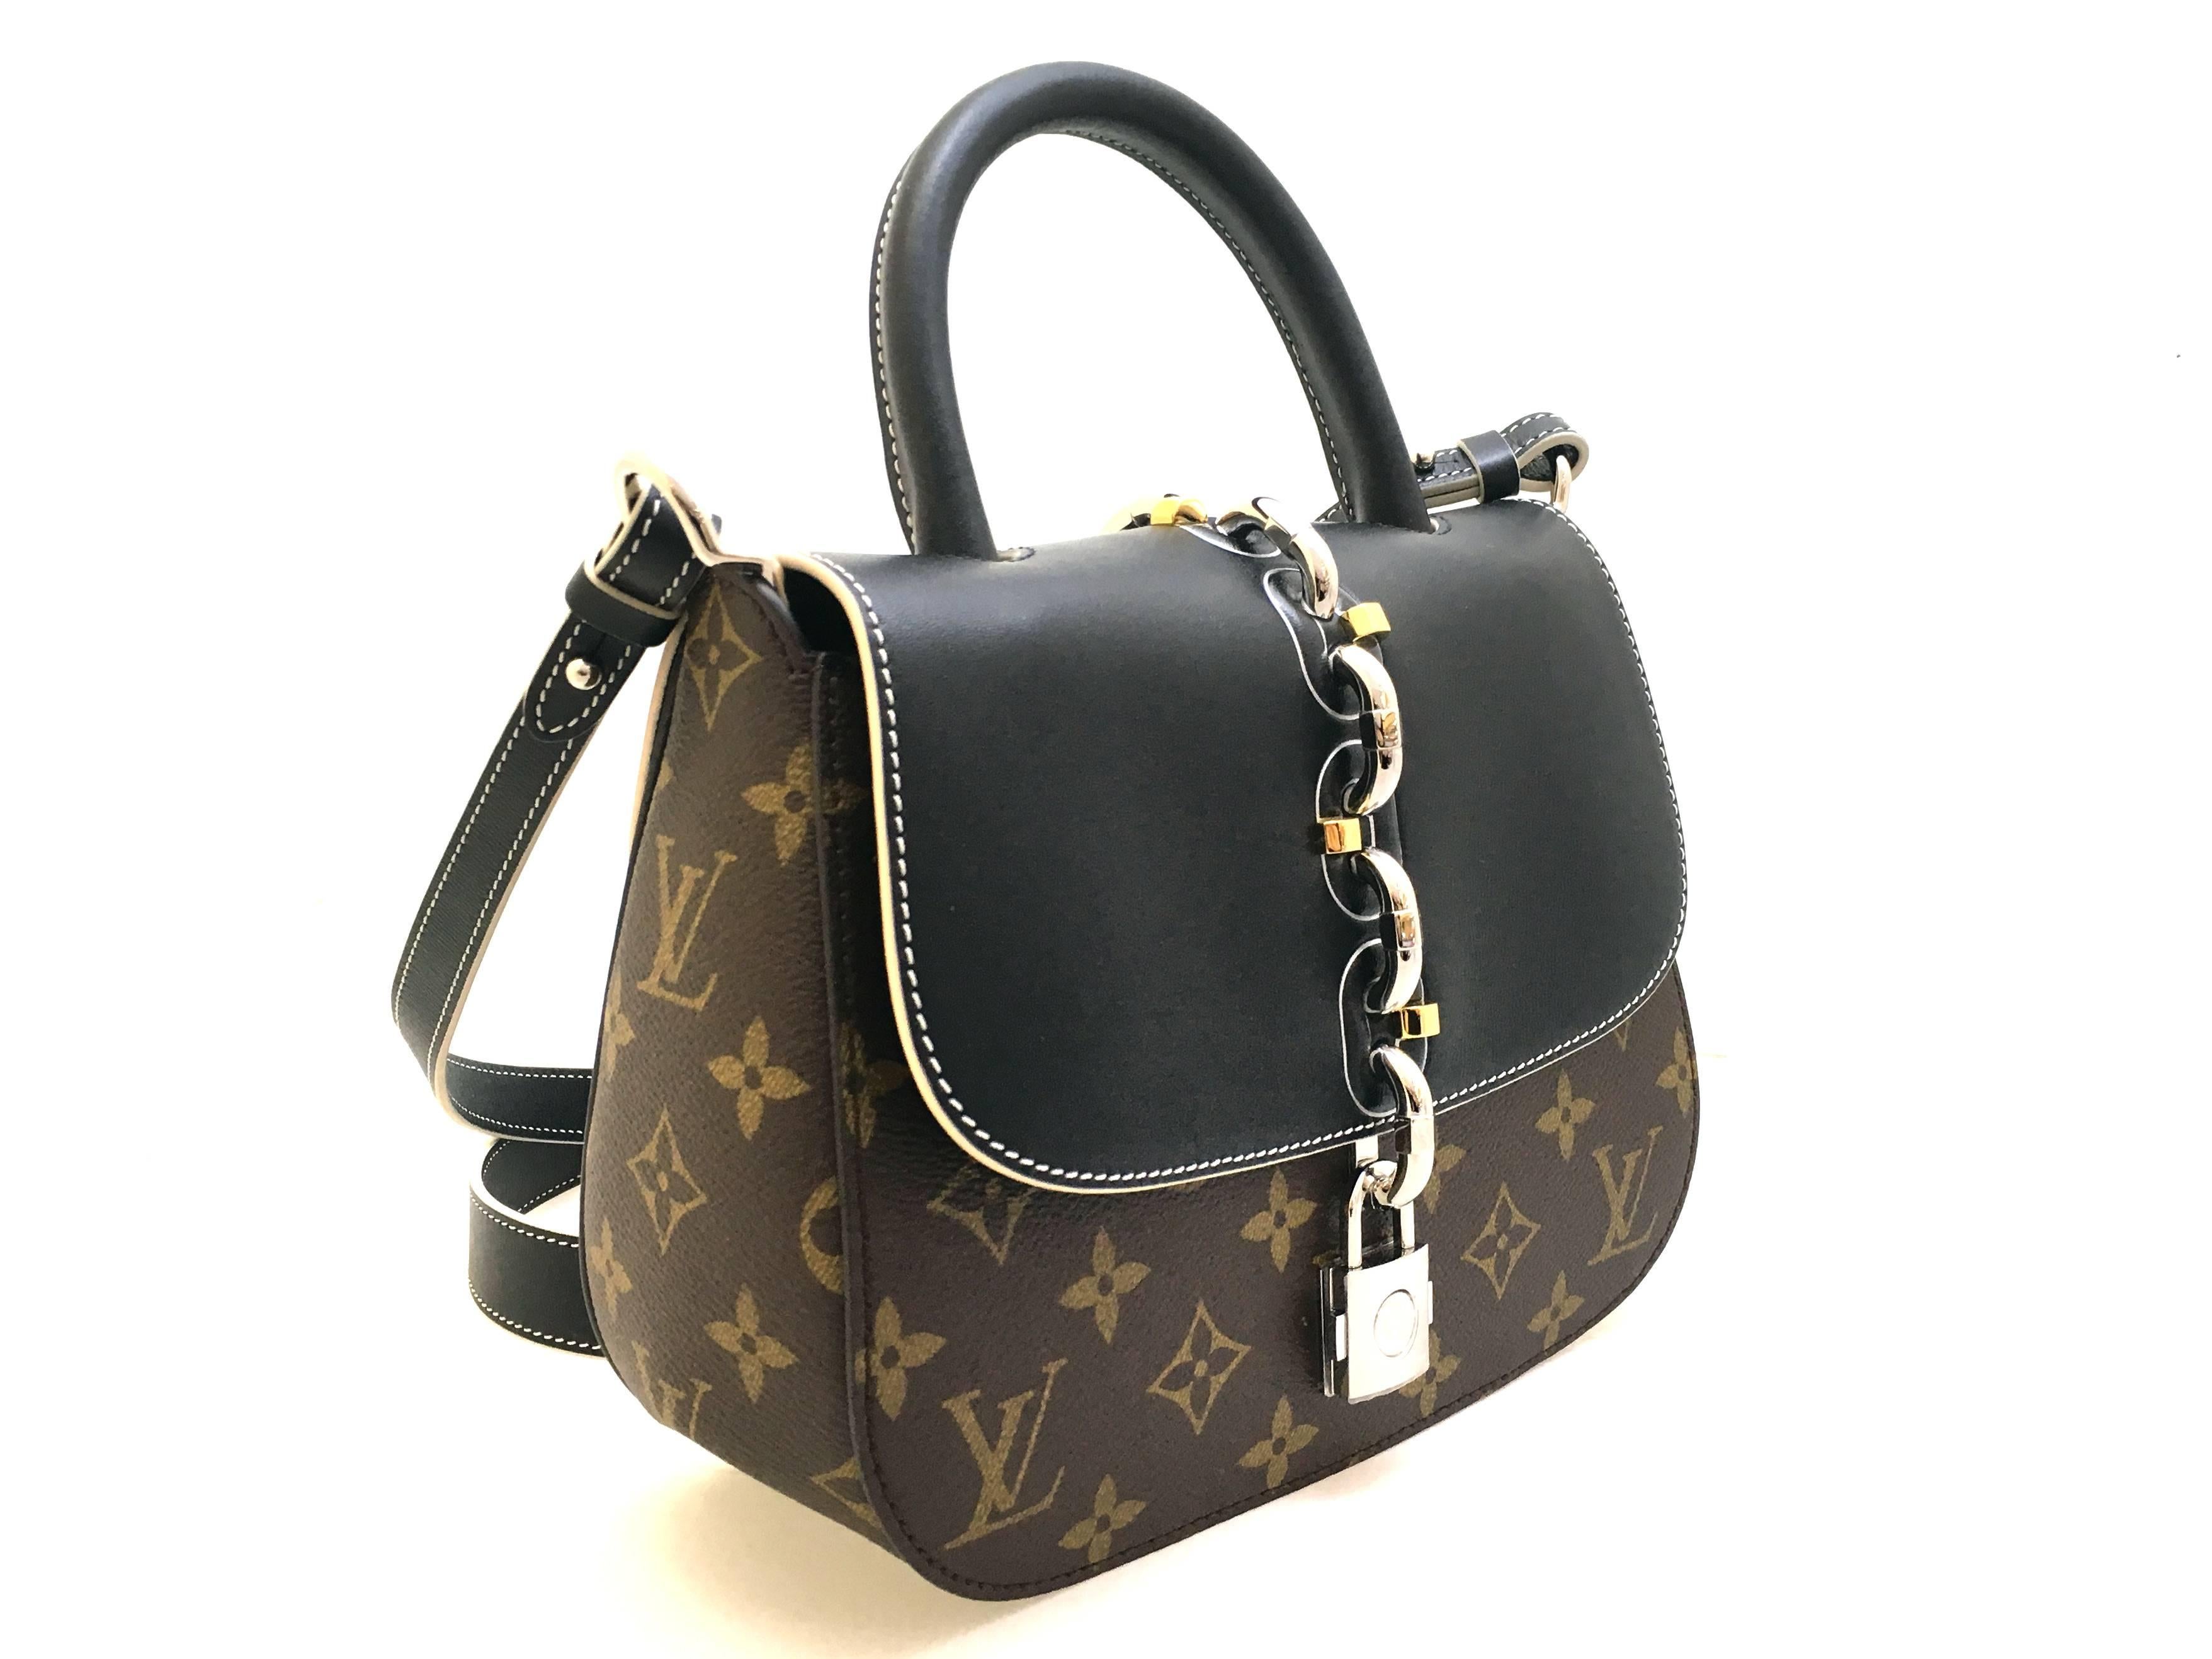 Color: black and monogram brown 

Material: Monogram Canvas 

Condition: Rank N 
Overall: Brand New. 
Surface: Good
Corners: Good
Edges: Good
Handles/ straps: Good
Hardware: Good

Dimension: W23 × H18 × D8cm（W9.0" × H7.0" ×